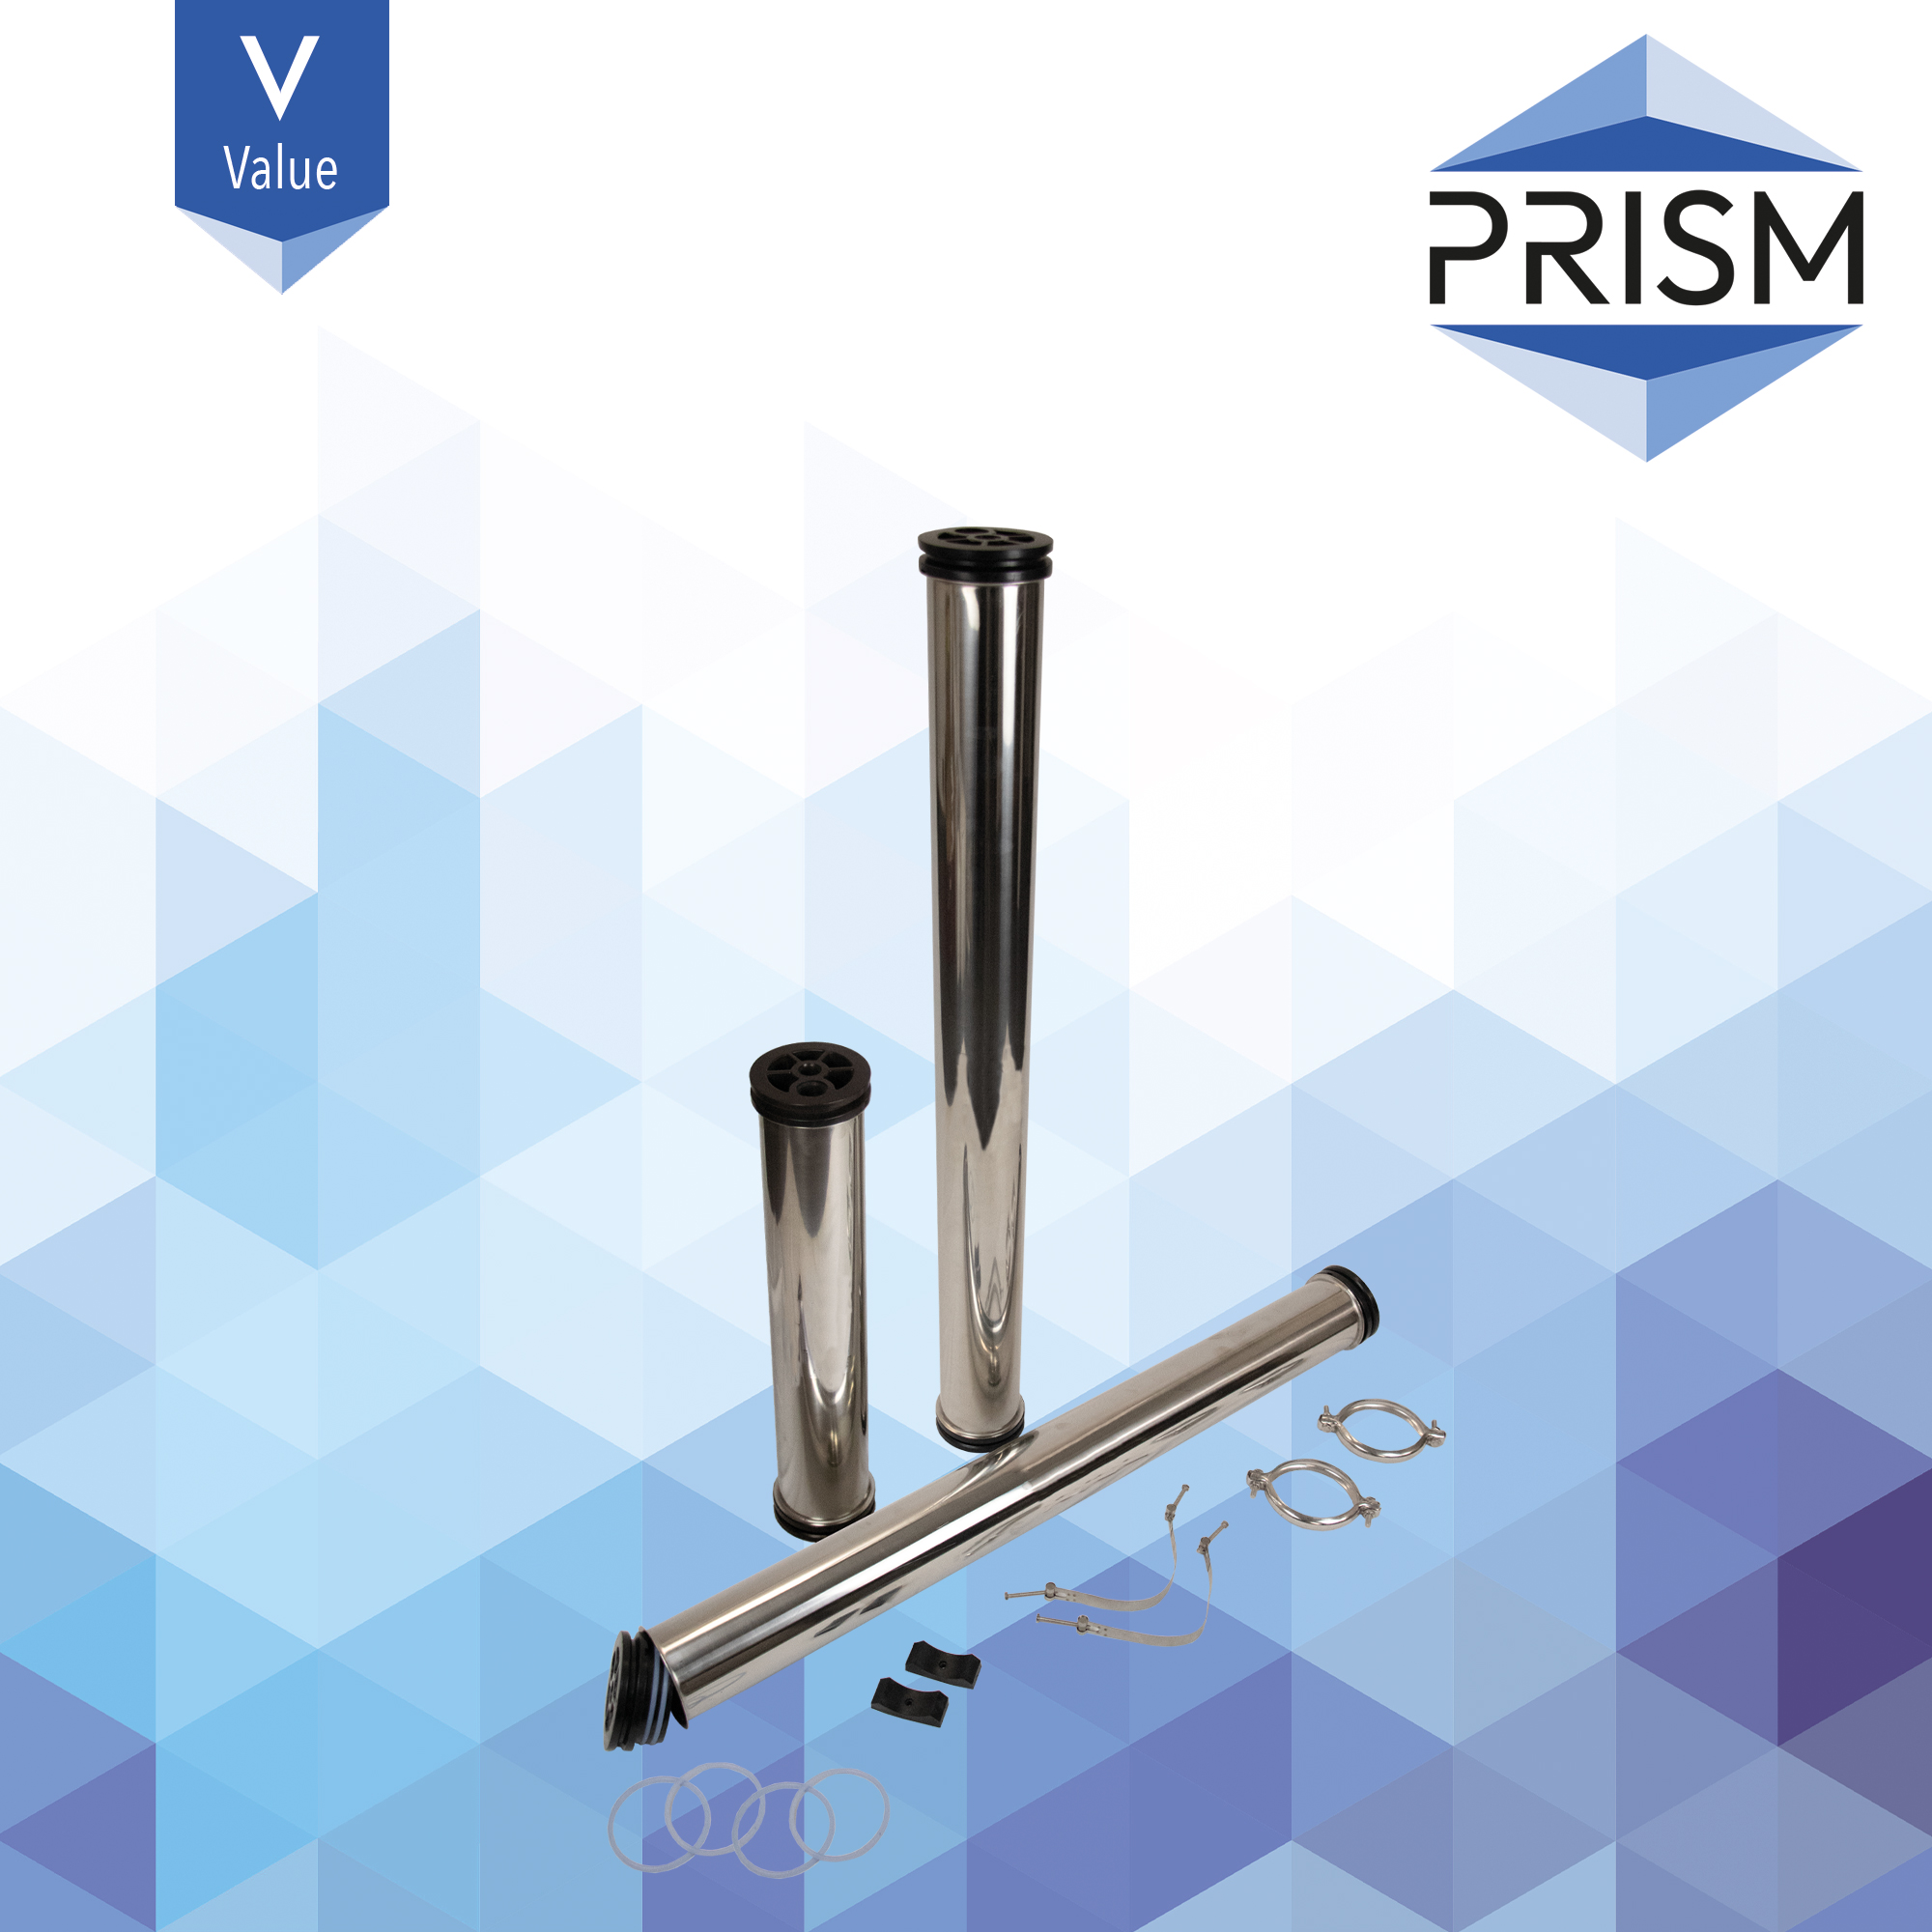 ROH-SS-4x21-1/2x3/4-P    PRISM PLUS RANGE :  SS Membrane Housing 4 x 21 with 3/4 and 1/2 Ports